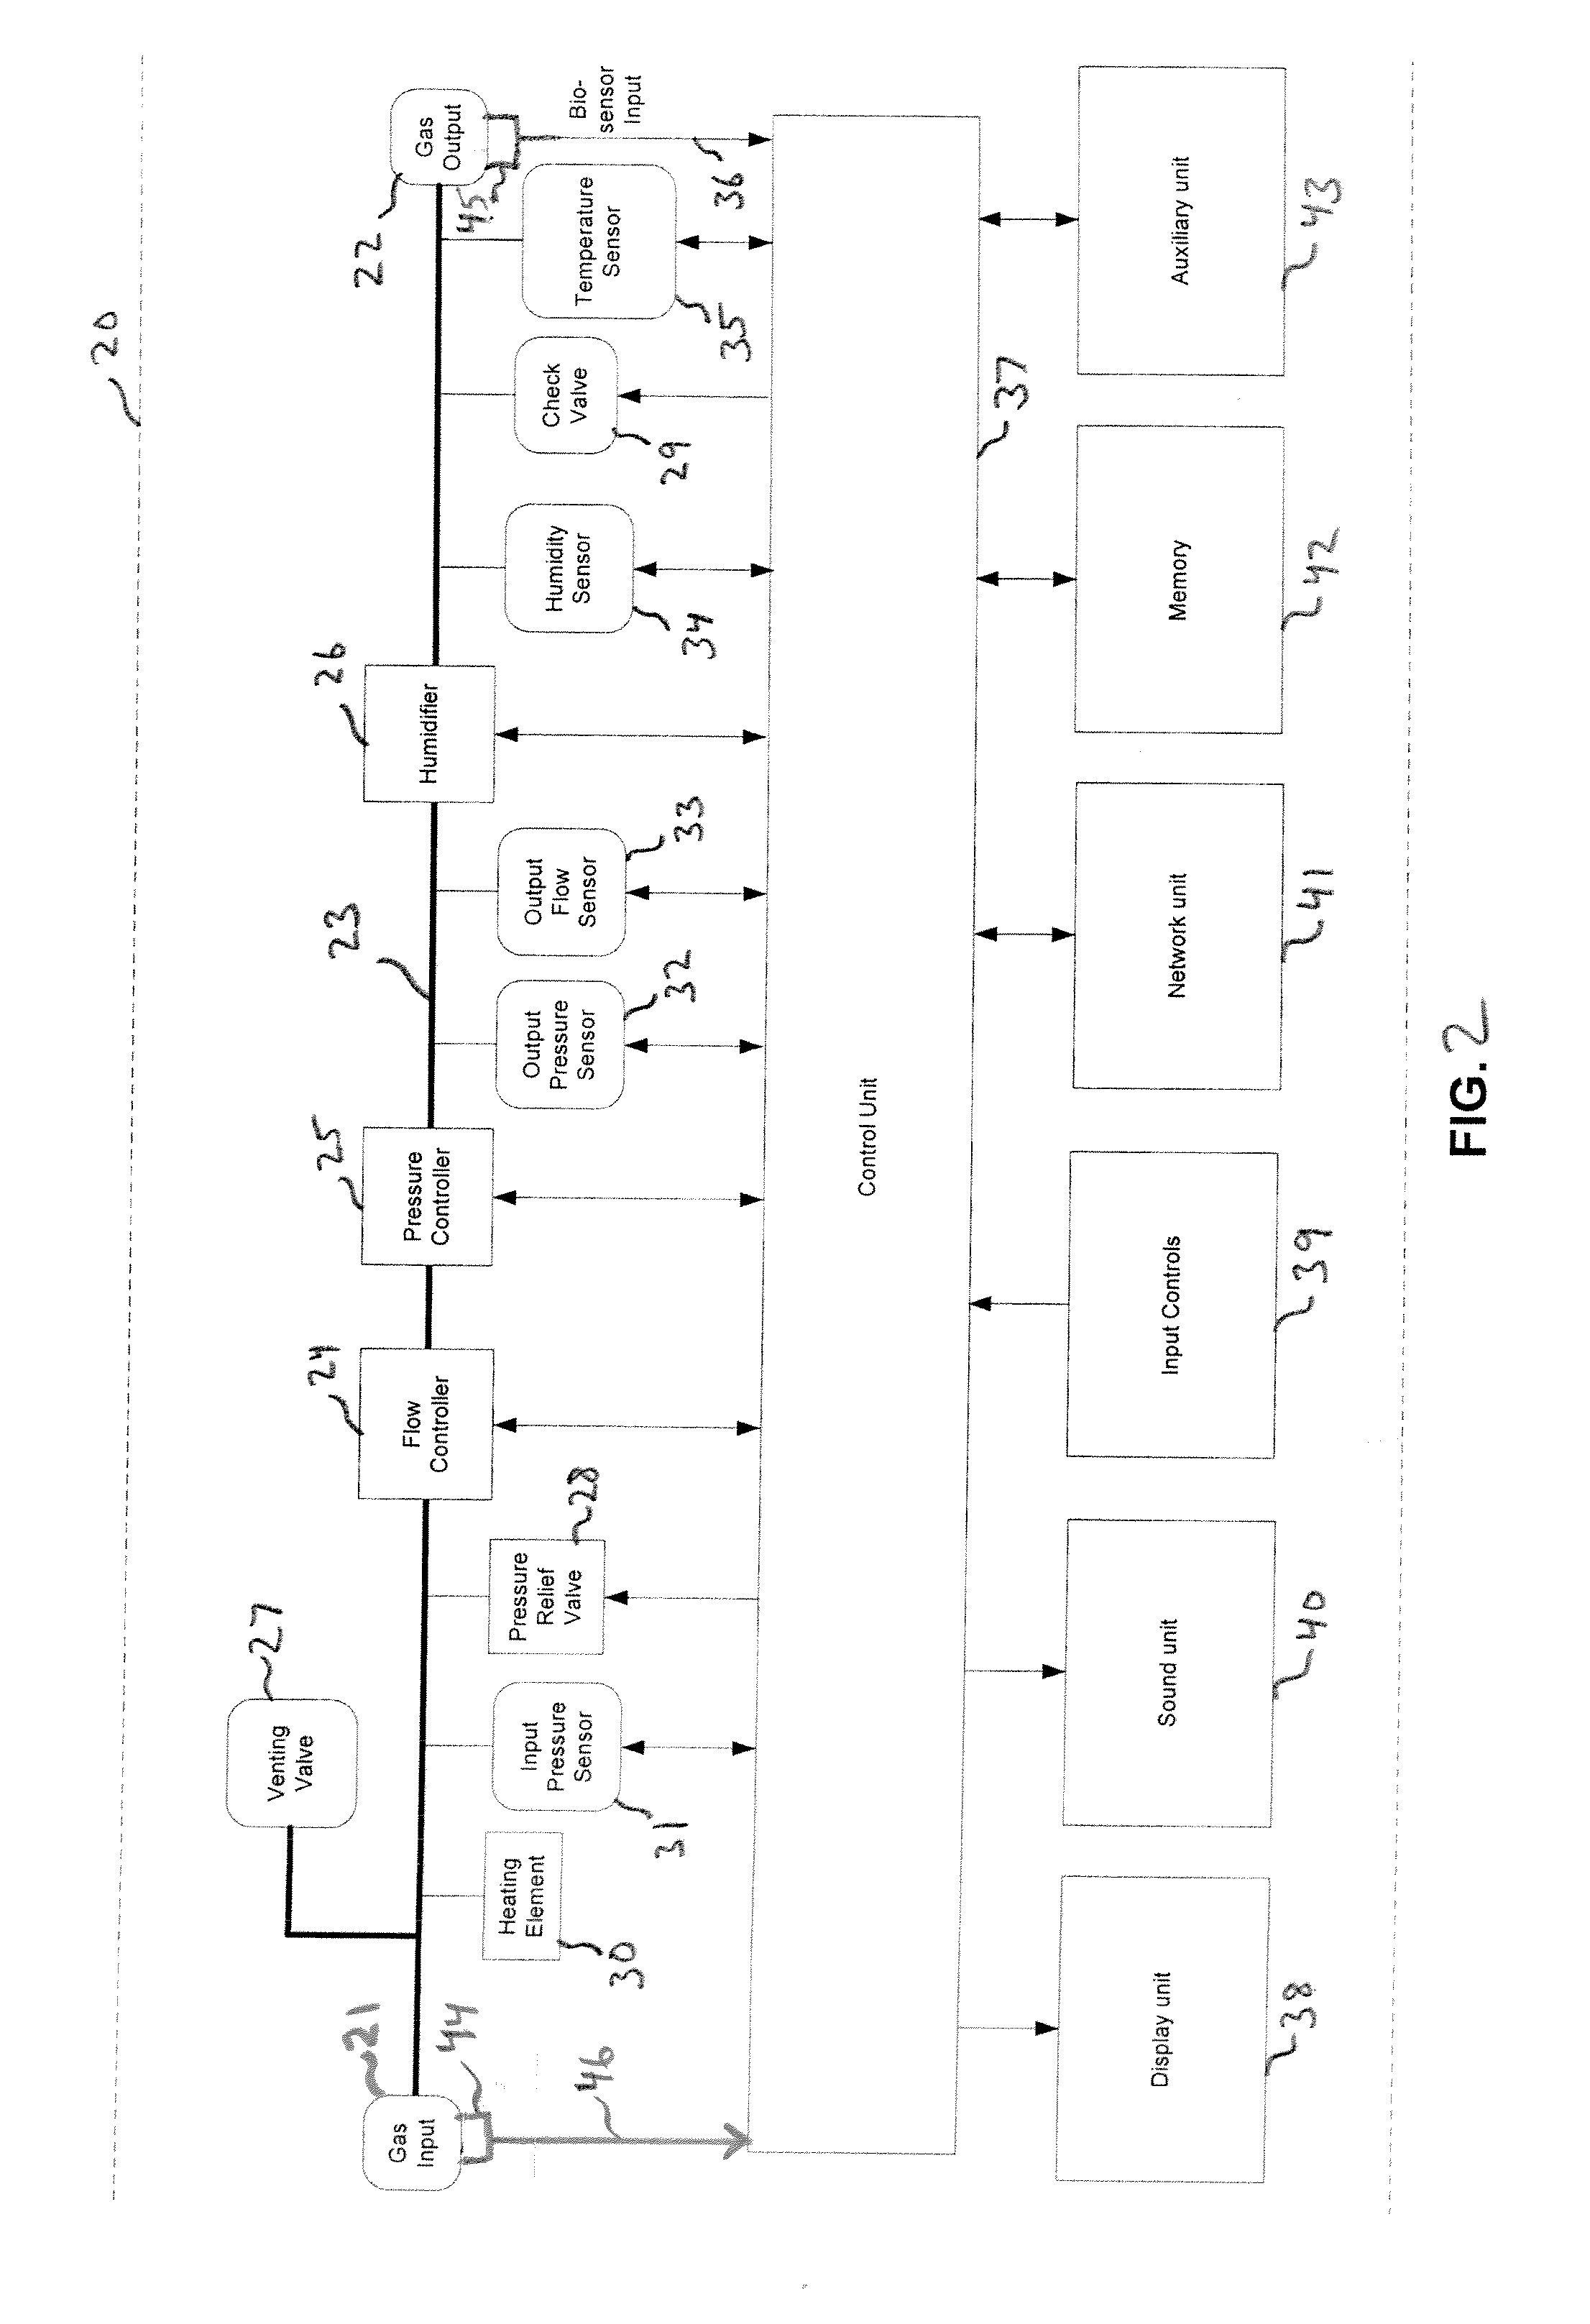 Method and Apparatus to Detect Biocontamination in an Insufflator for use in Endoscopy